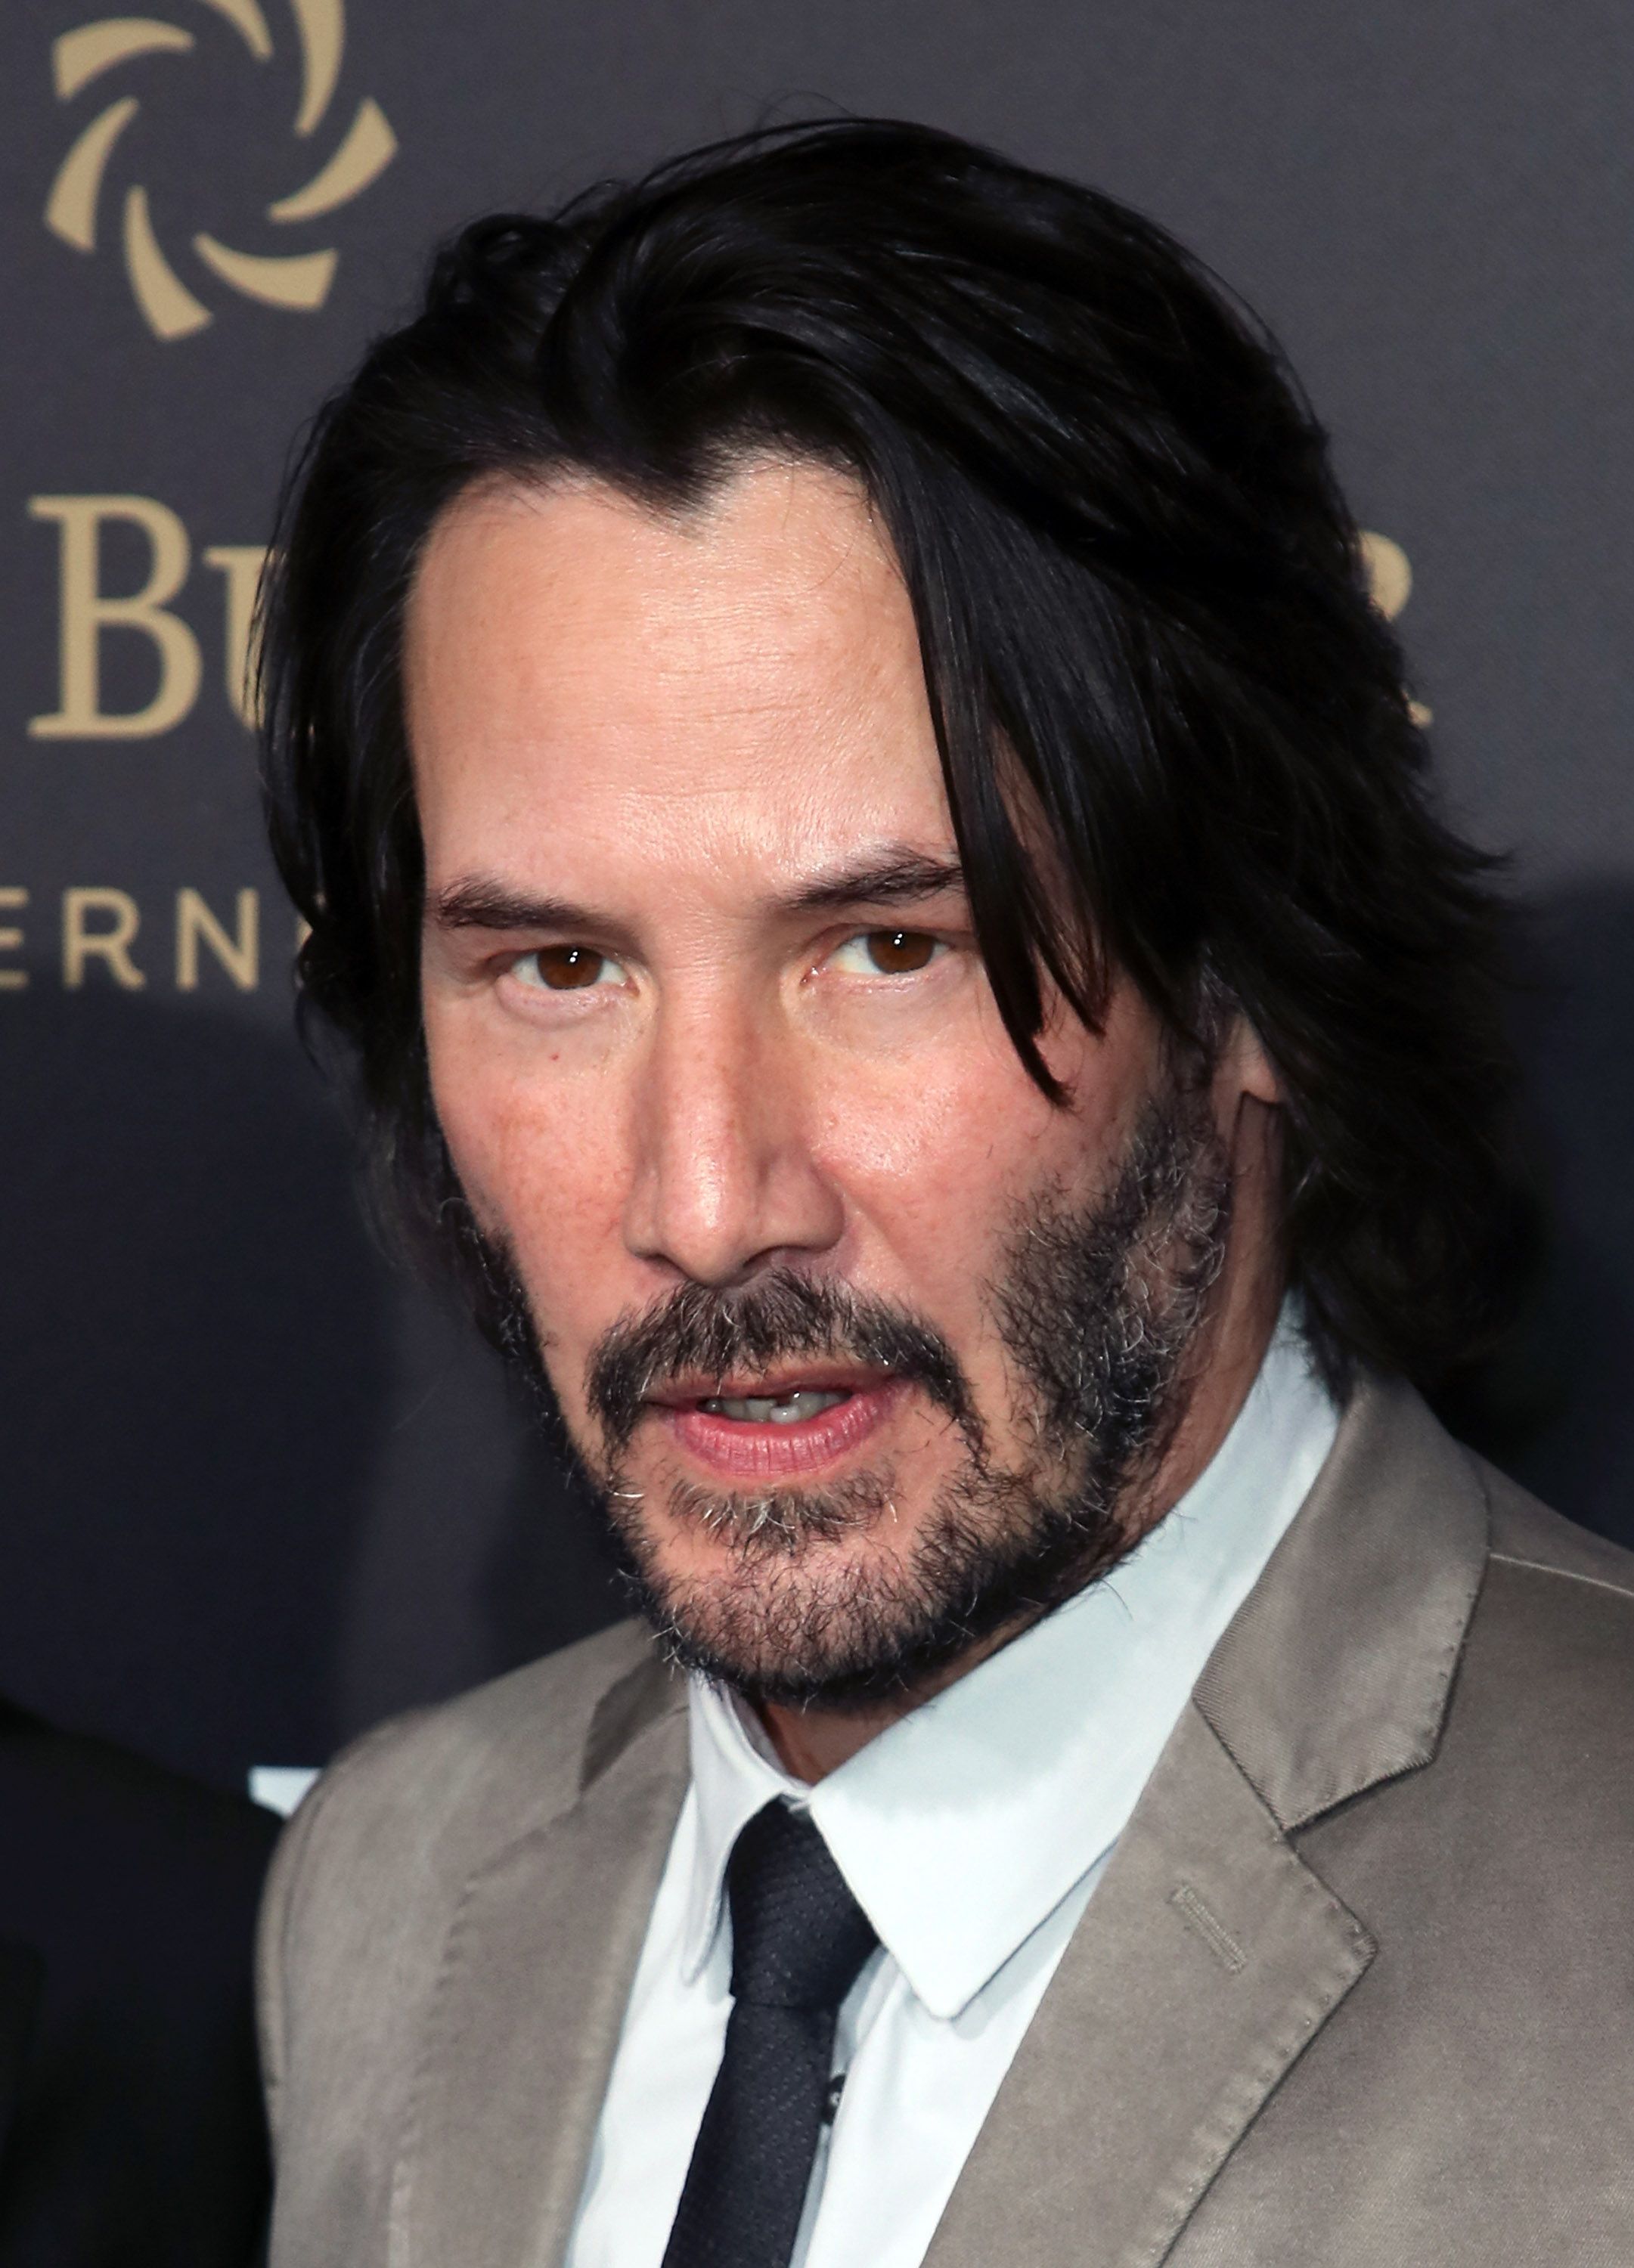 Keanu Reeves at the premiere of "John Wick: Chapter Two" on January 30, 2017, in Hollywood, California | Photo: David Livingston/Getty Images